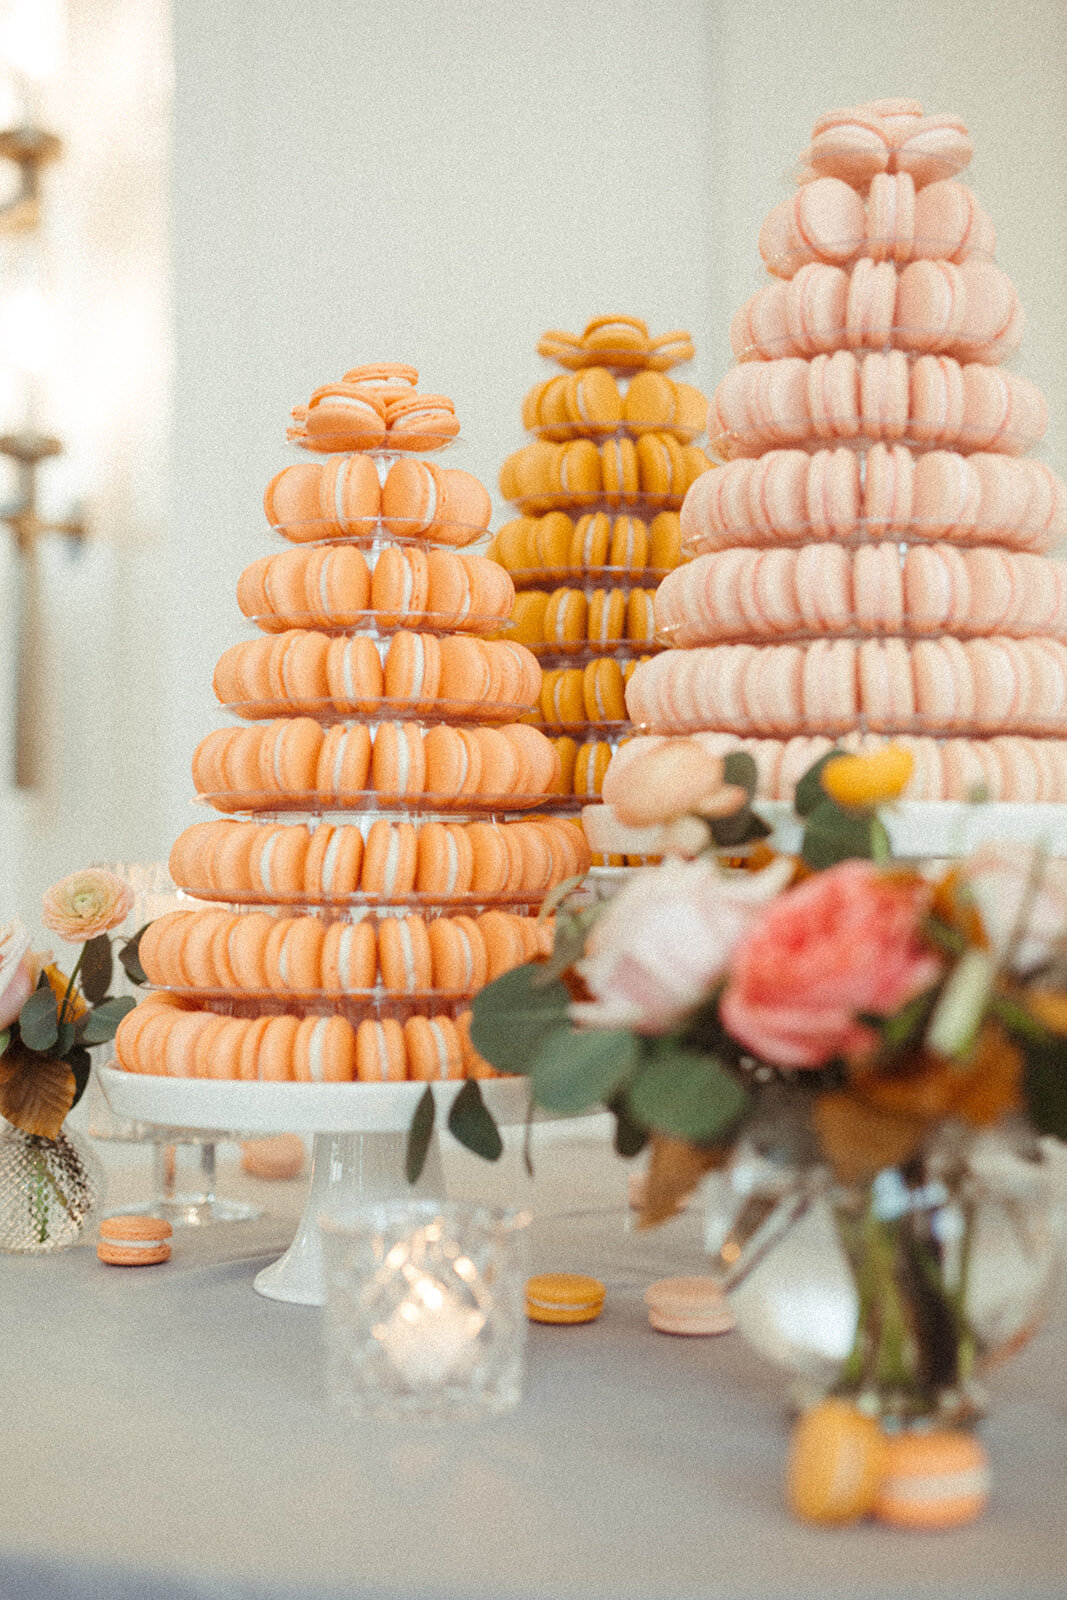 An assortment of macaroons on cake stands atop a table with light gray linen, a candle and flowers.